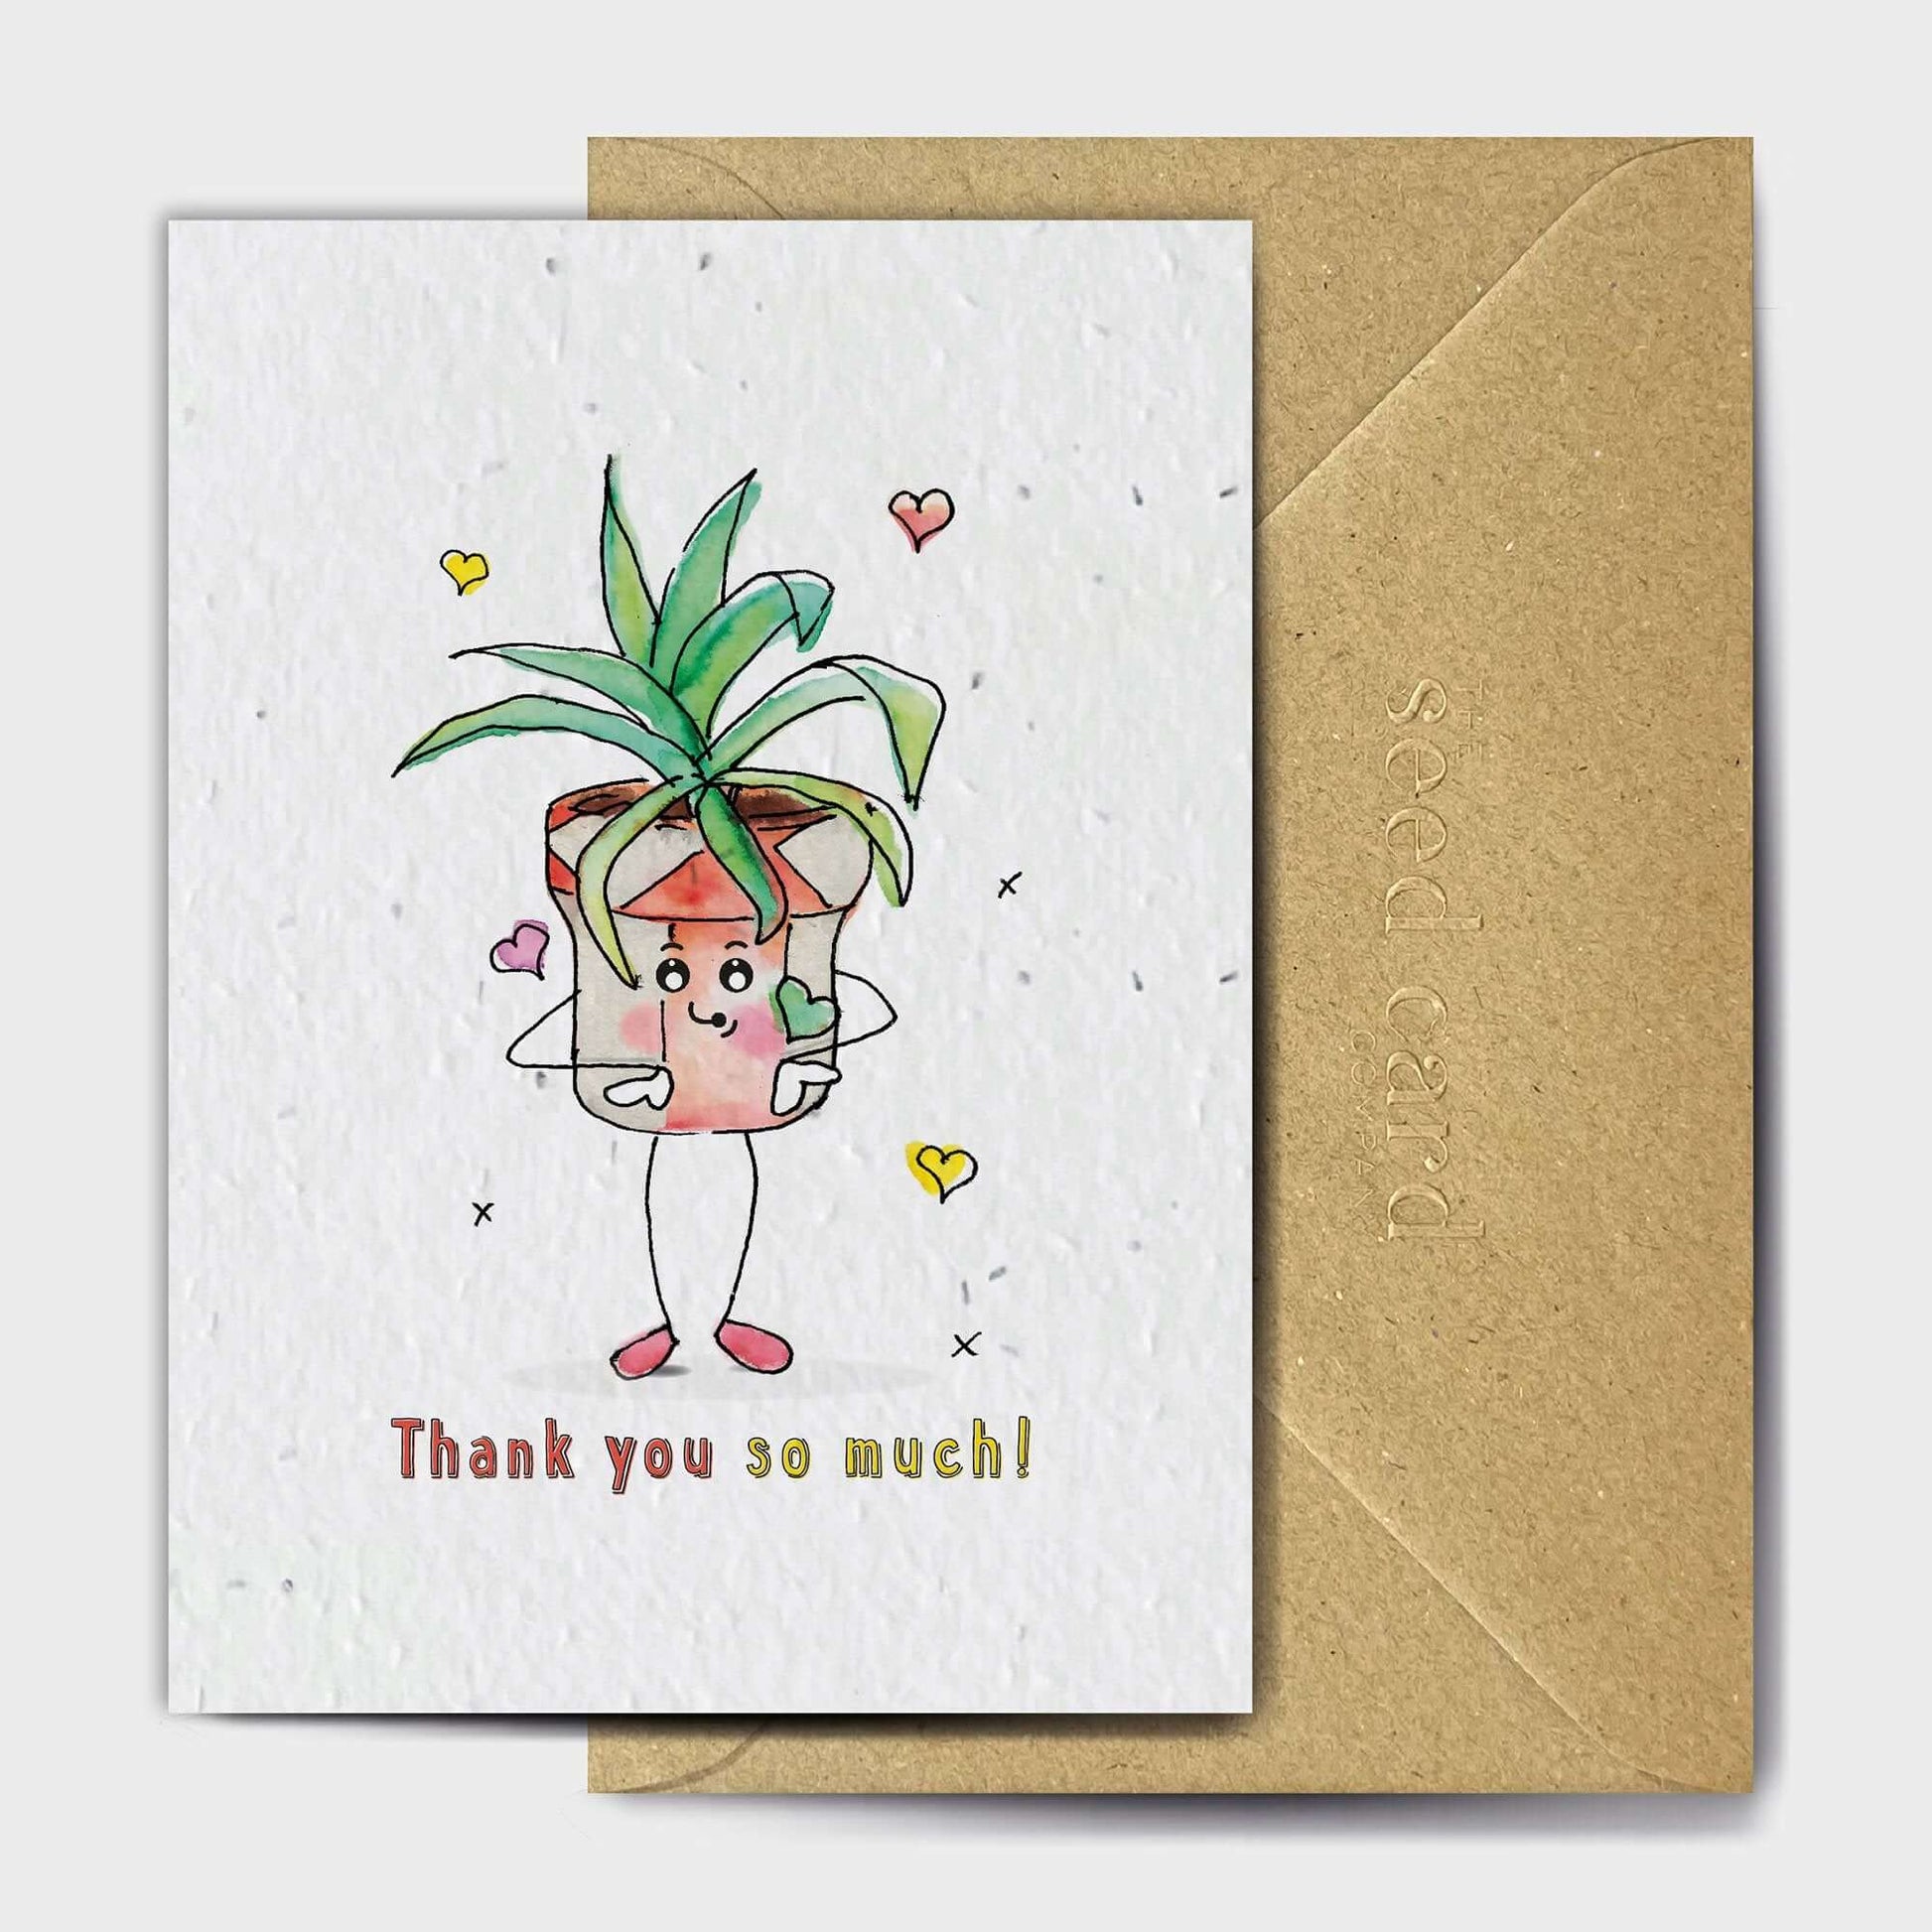 The Seed Card Company "Thanking You"